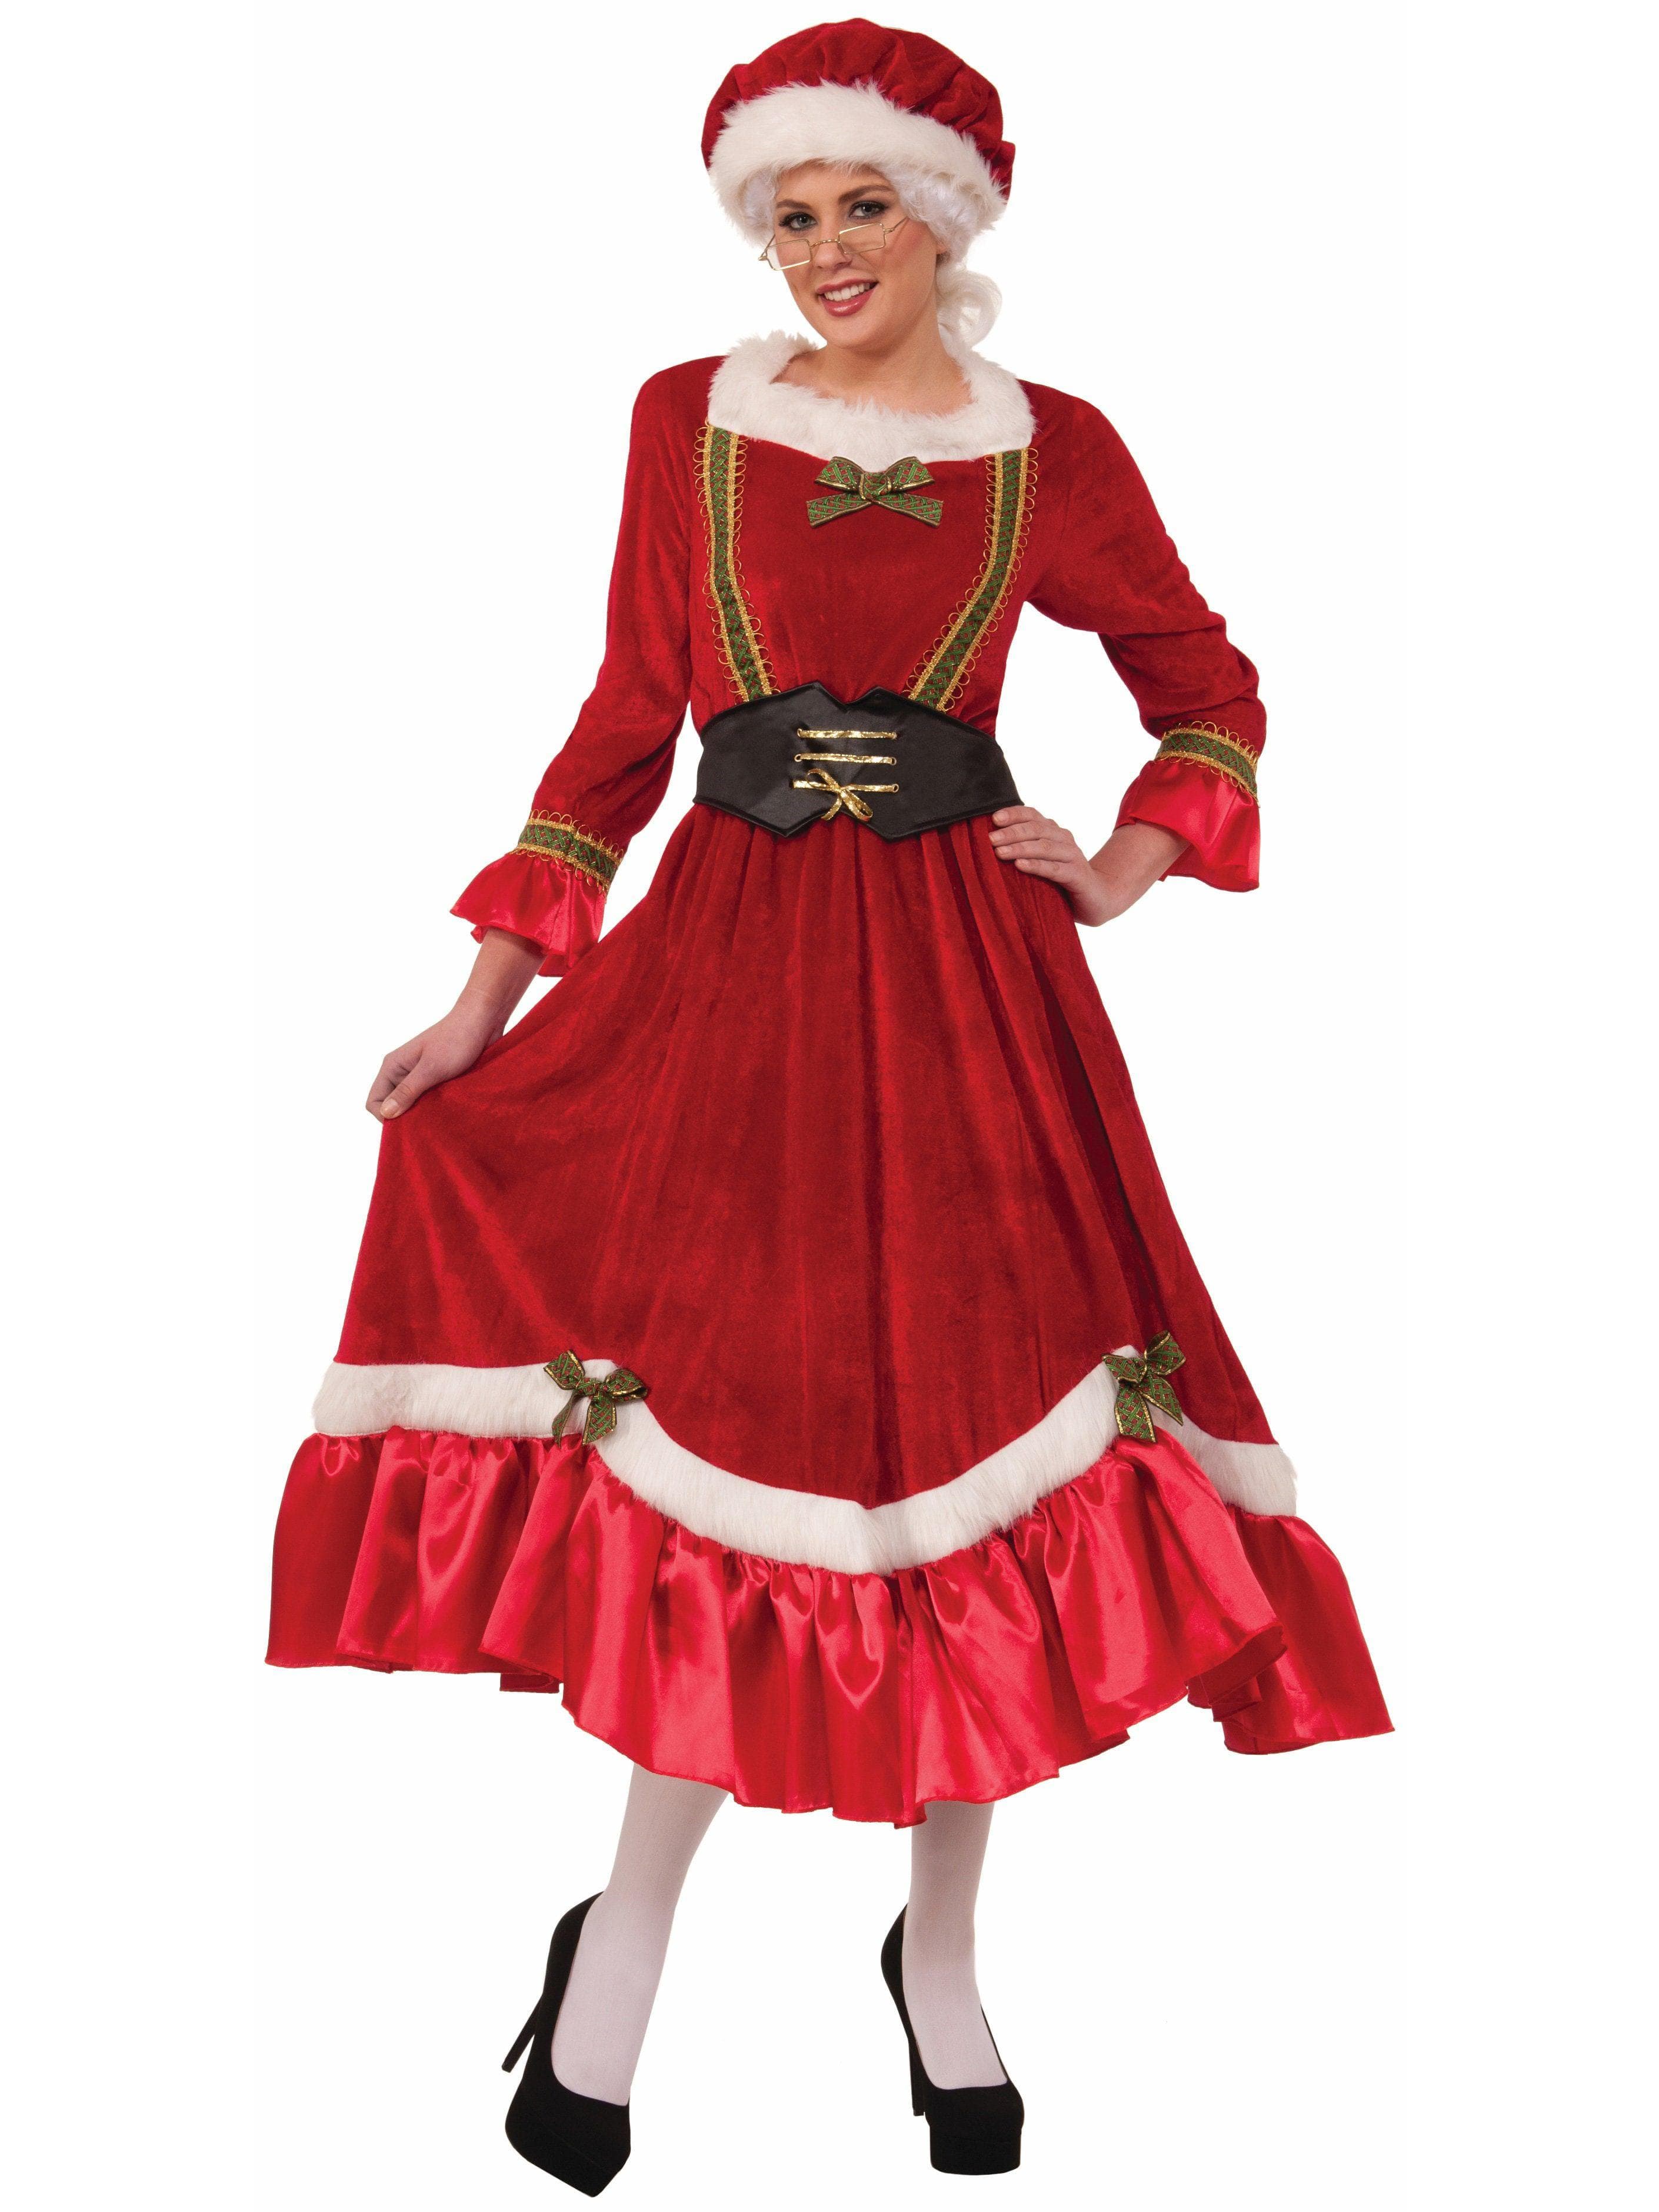 Adult Mrs. Claus Traditional Dress Costume - costumes.com